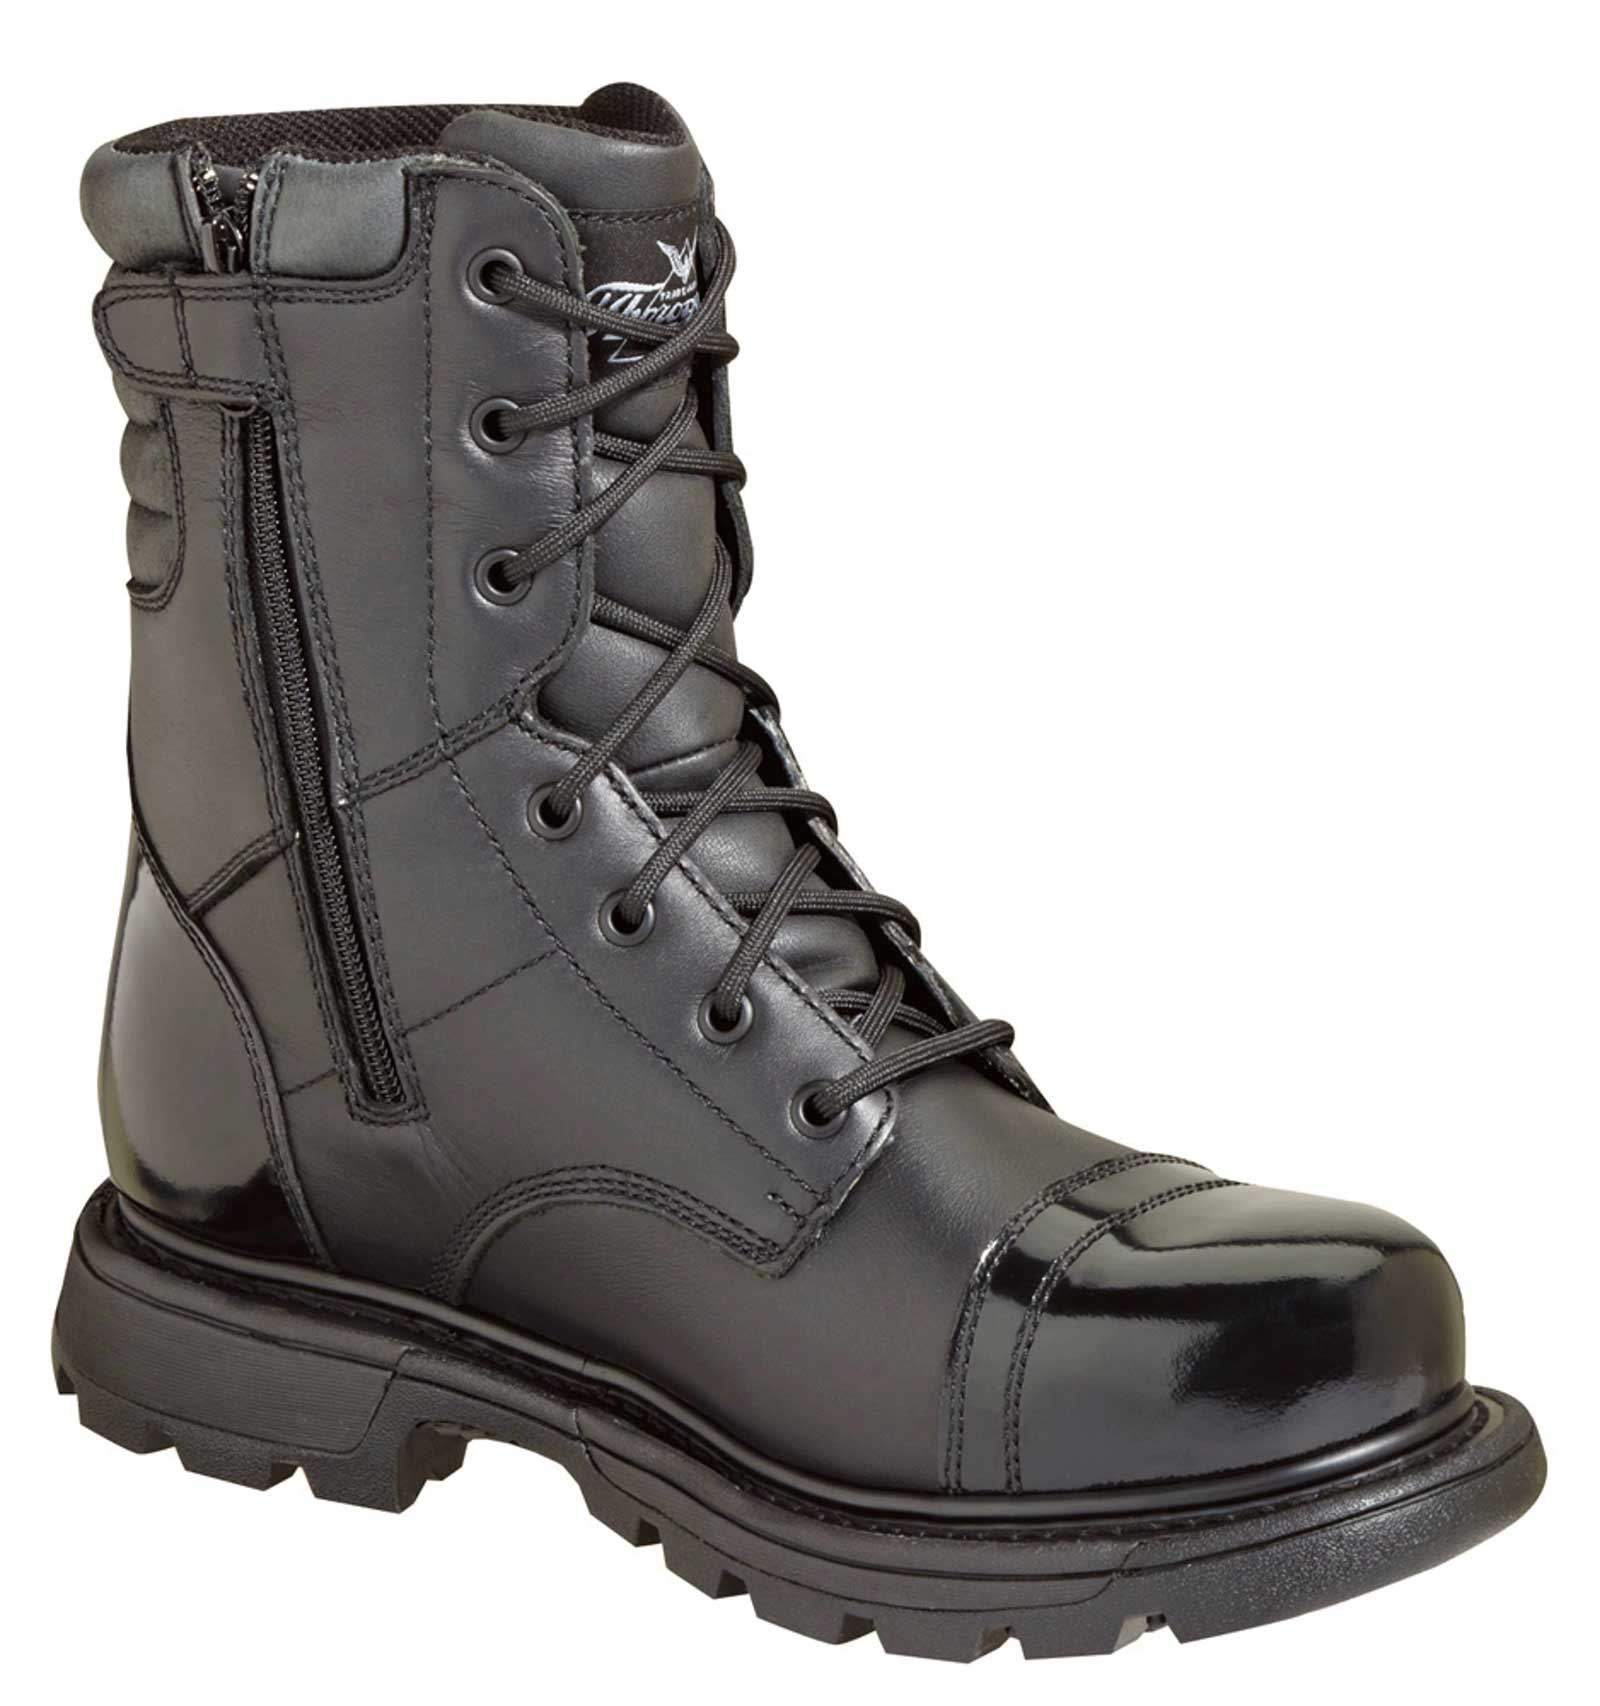 work boots with zipper on side